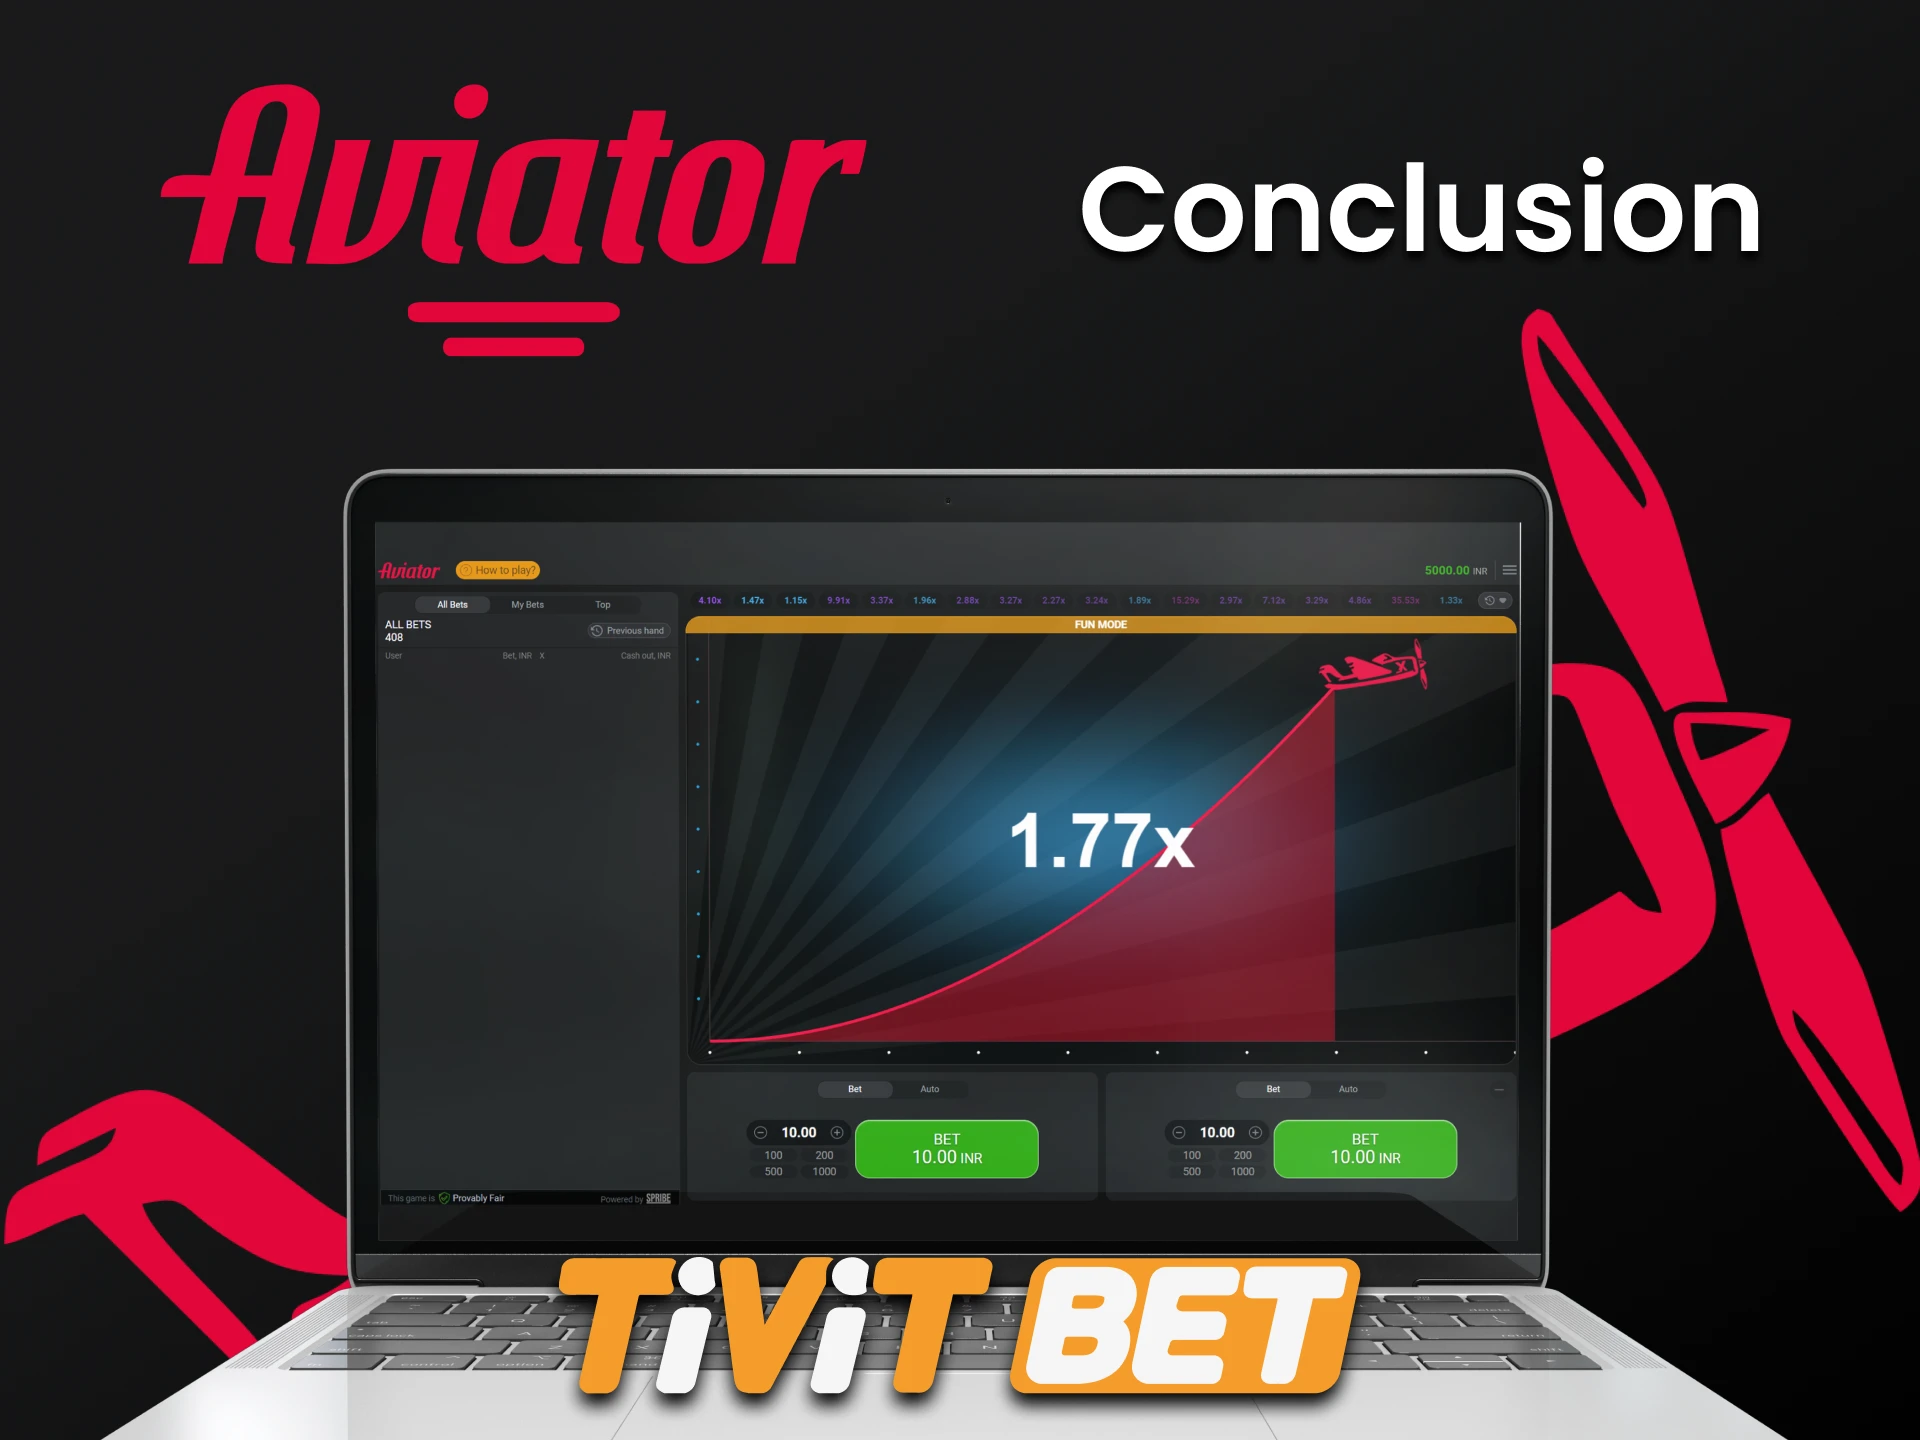 Tivitbet is ideal for playing Aviator.